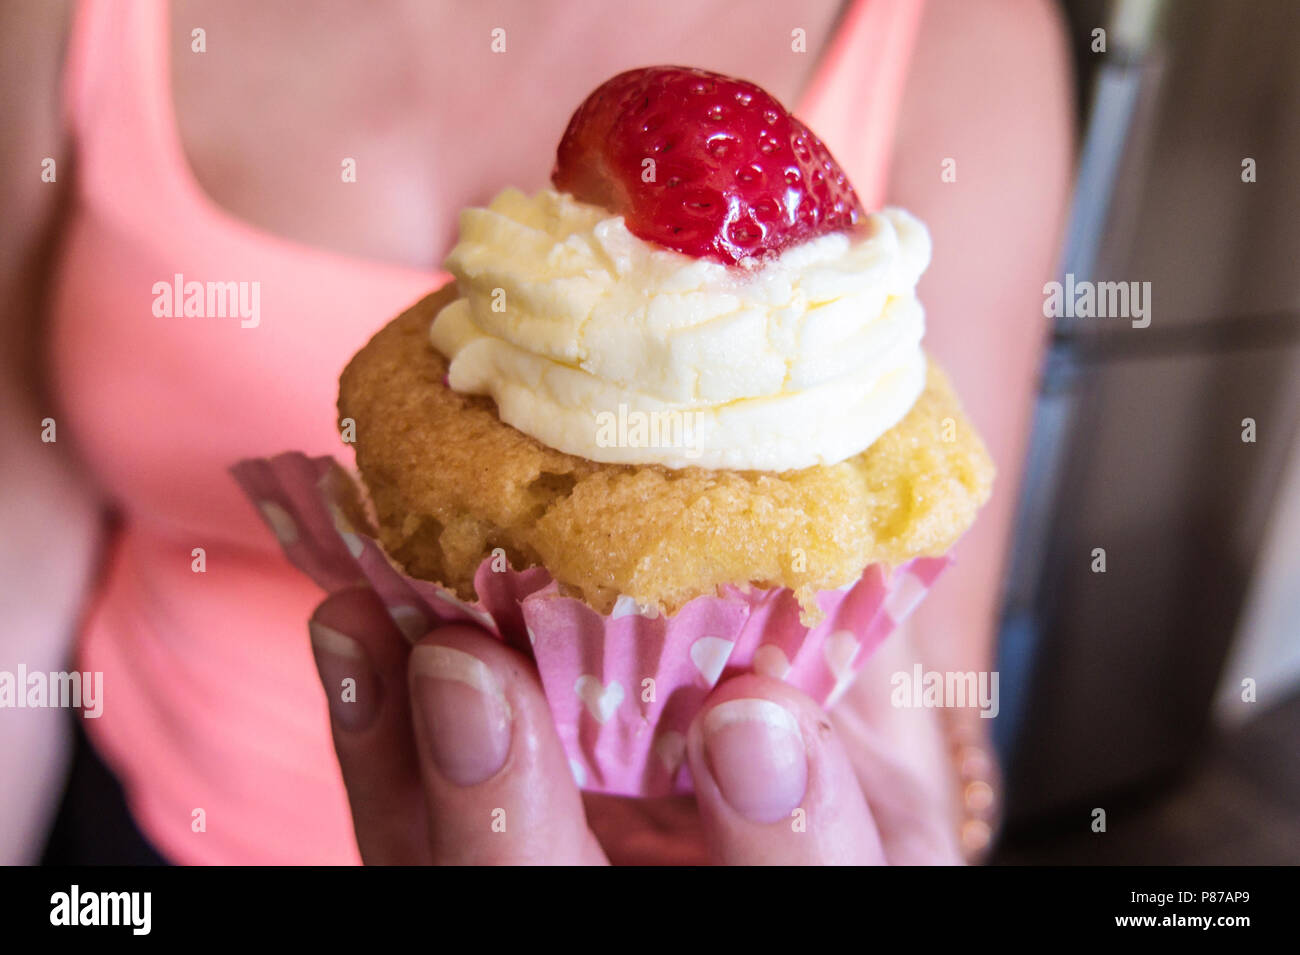 close up of strawberry cupcake with butter icing in lady's hand Stock Photo